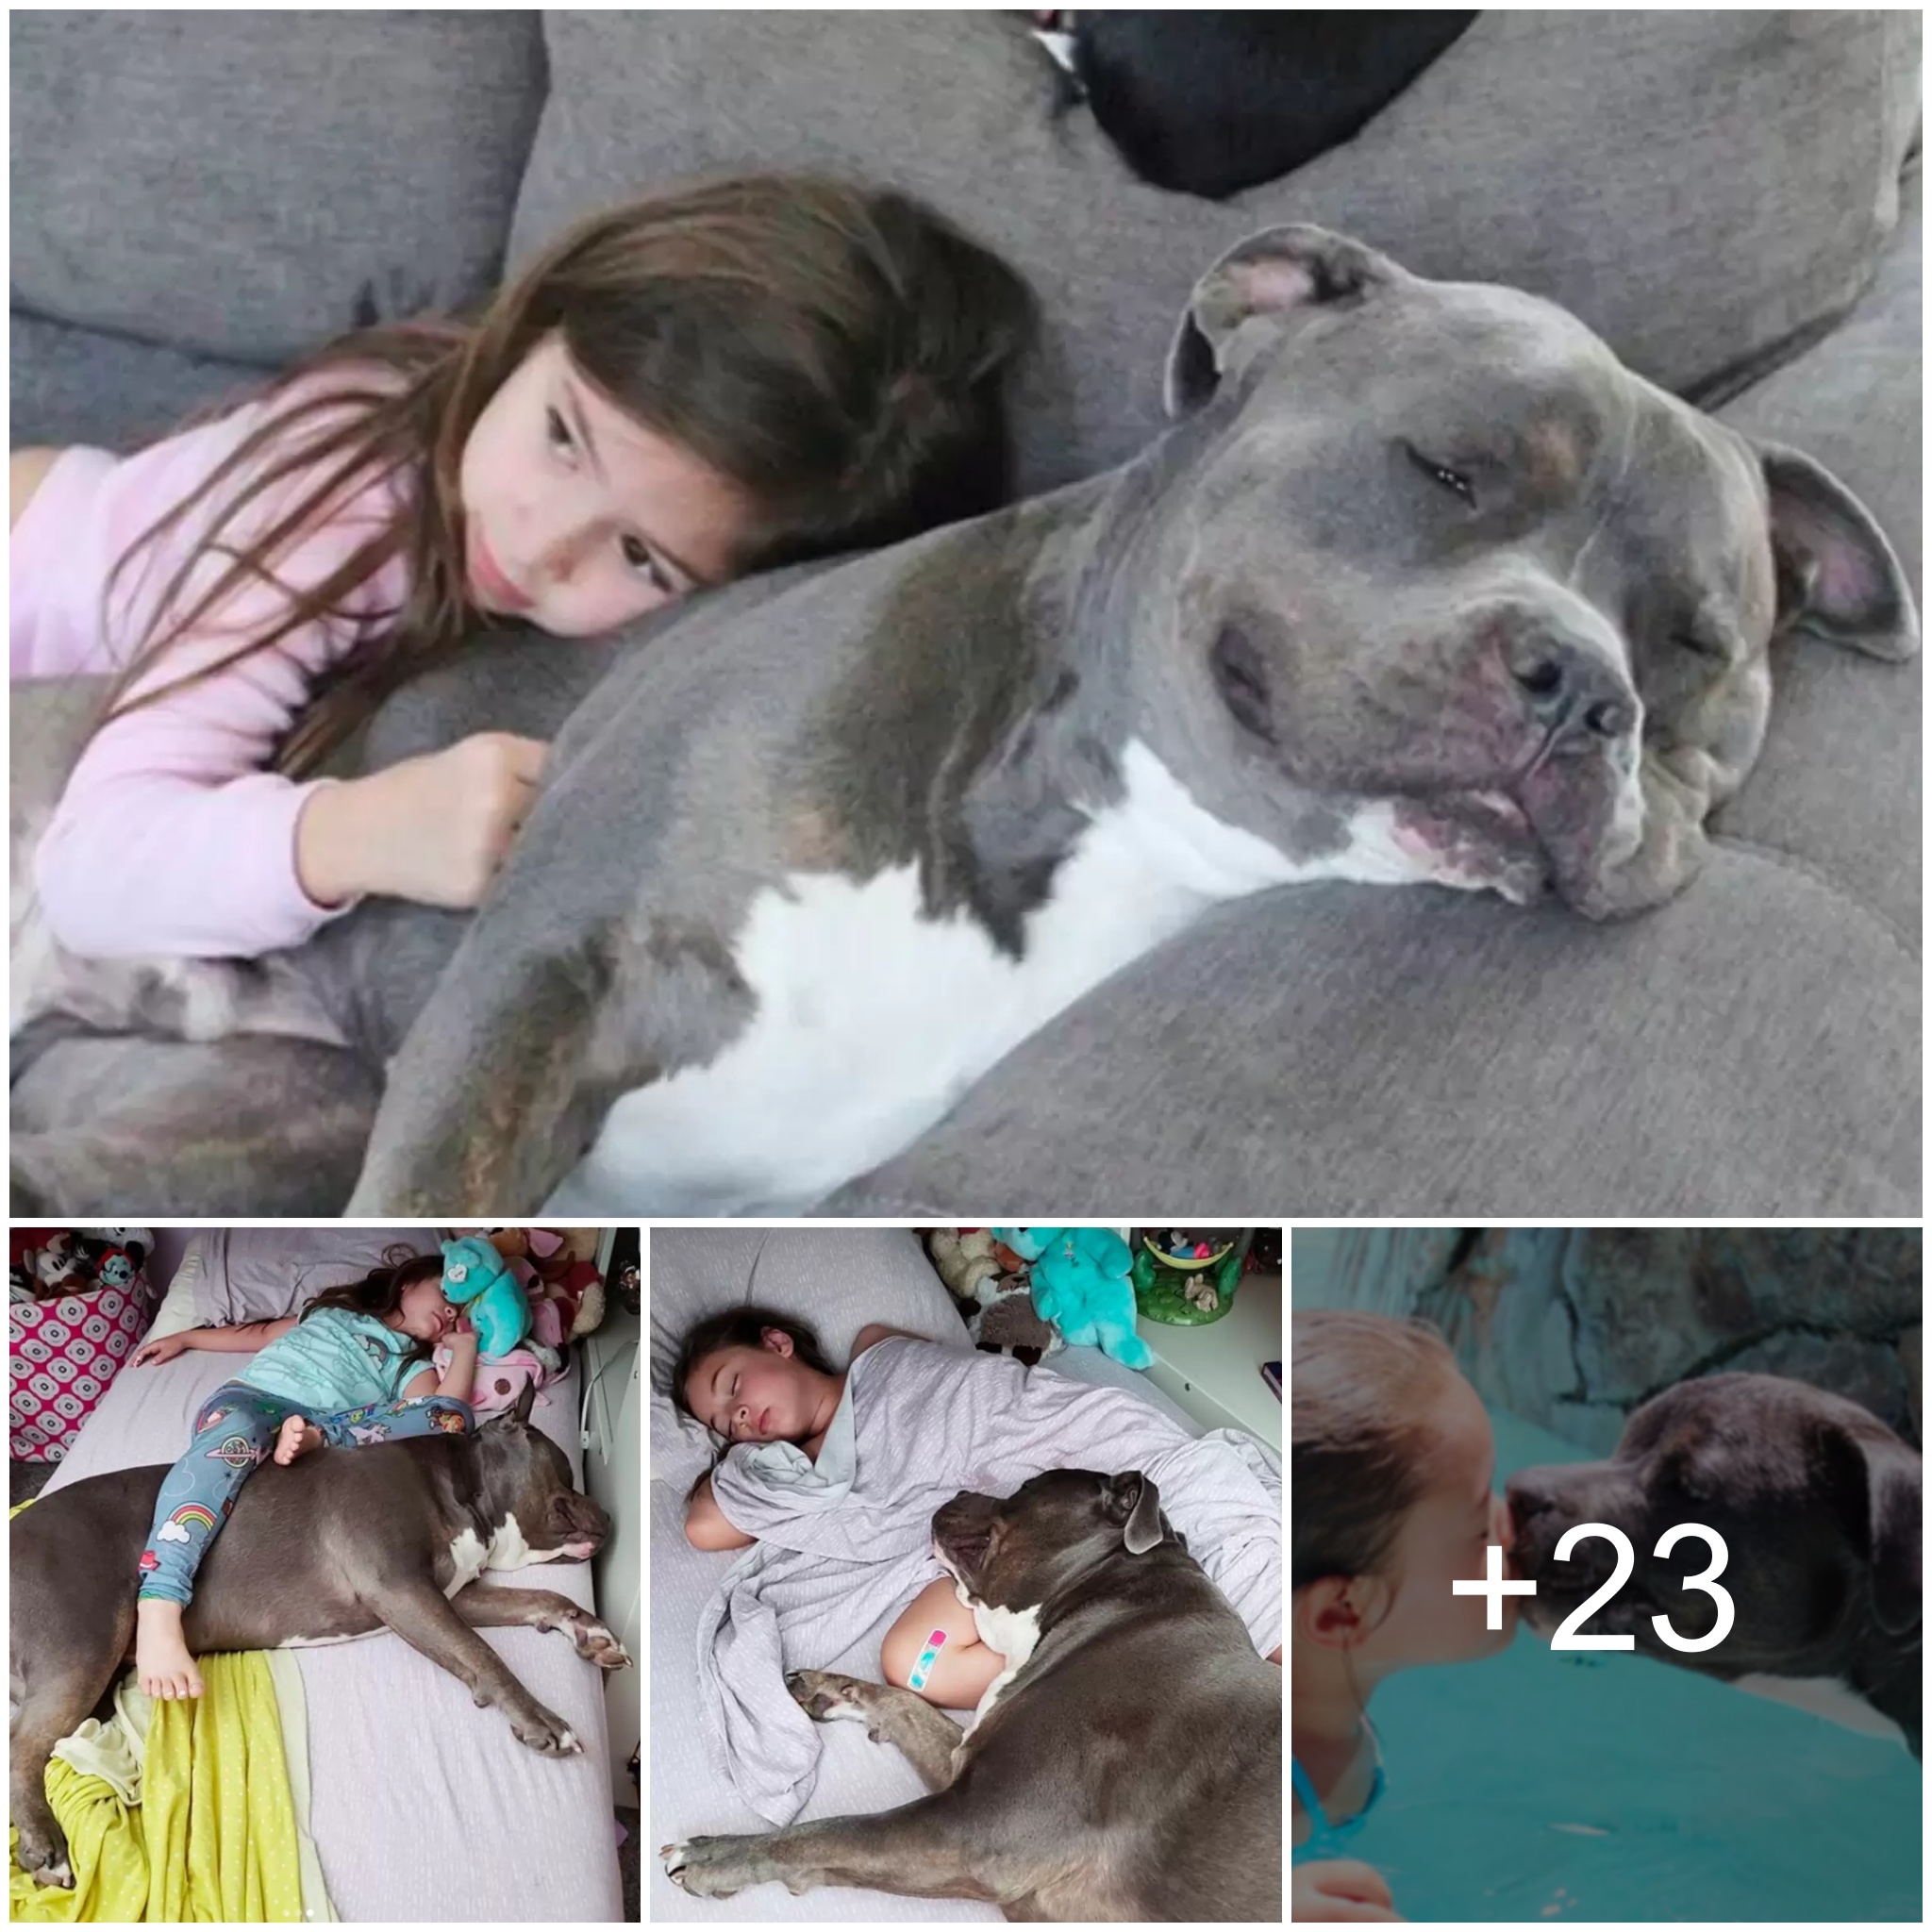 The dog’s warm and comforting actions towards the sleeping girl melted everyone’s hearts.This Pittie Can’t Sleep Without His Little Girl By His Side